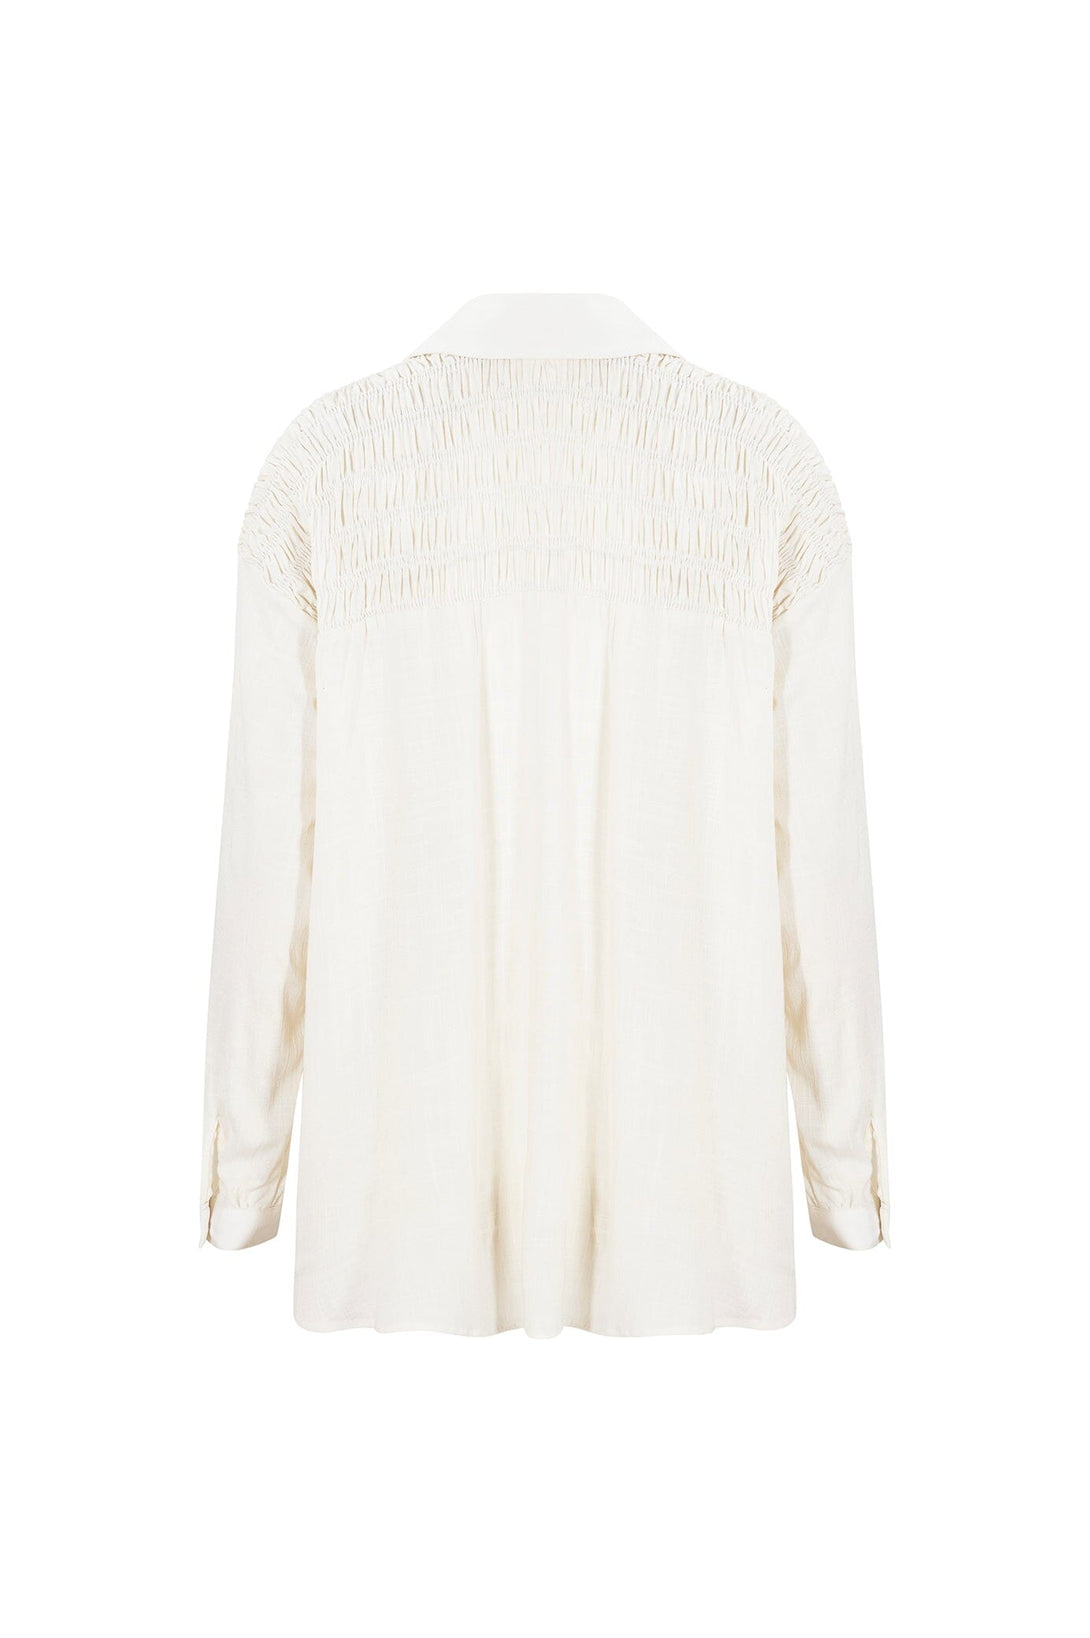 Wendy Long Sleeve Collared Shirt Ivory Tops